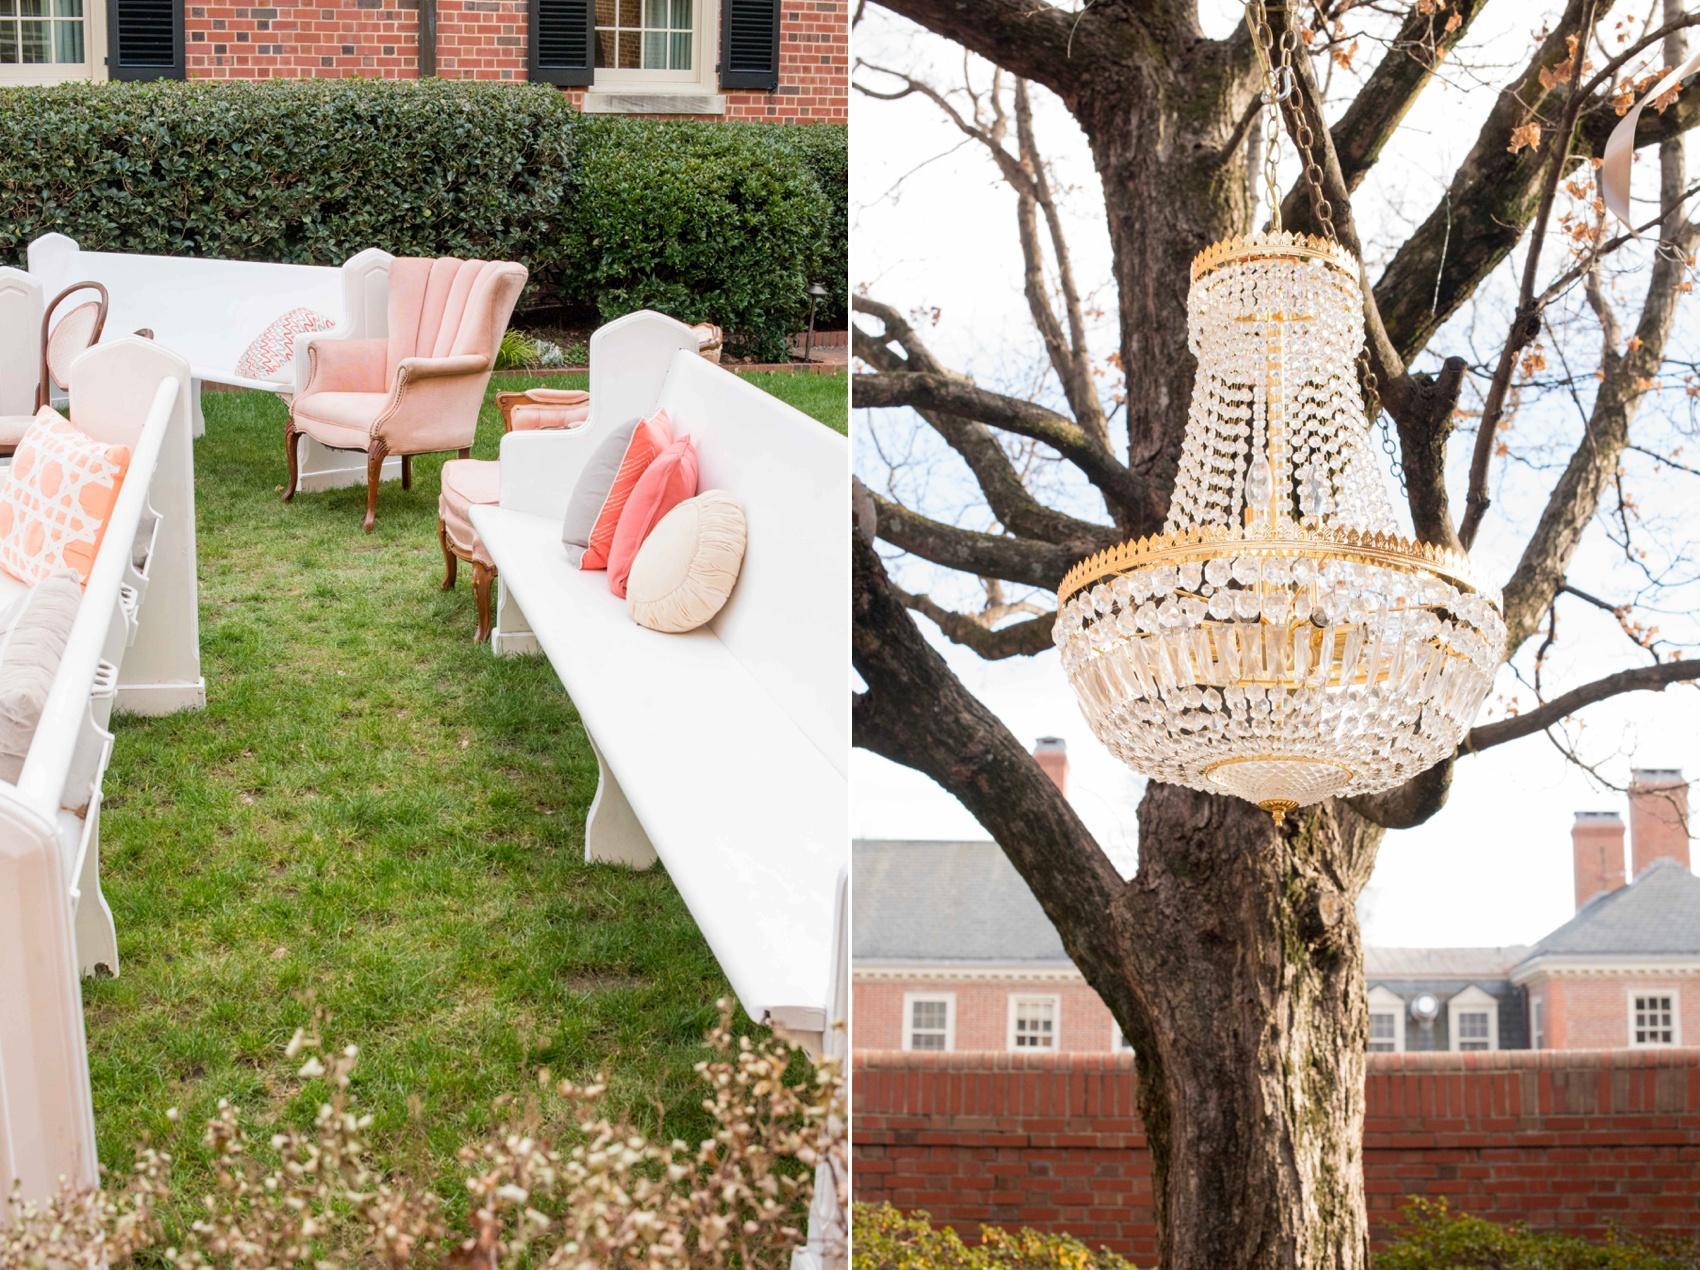 The Carolina Inn wedding photos - bridal showcase 2016. Mikkel Paige Photography captures the event with Sally Oakley events outdoor ceremony setup by Paisley and Jade, Eclectic Sage and AB Chalk Designs.